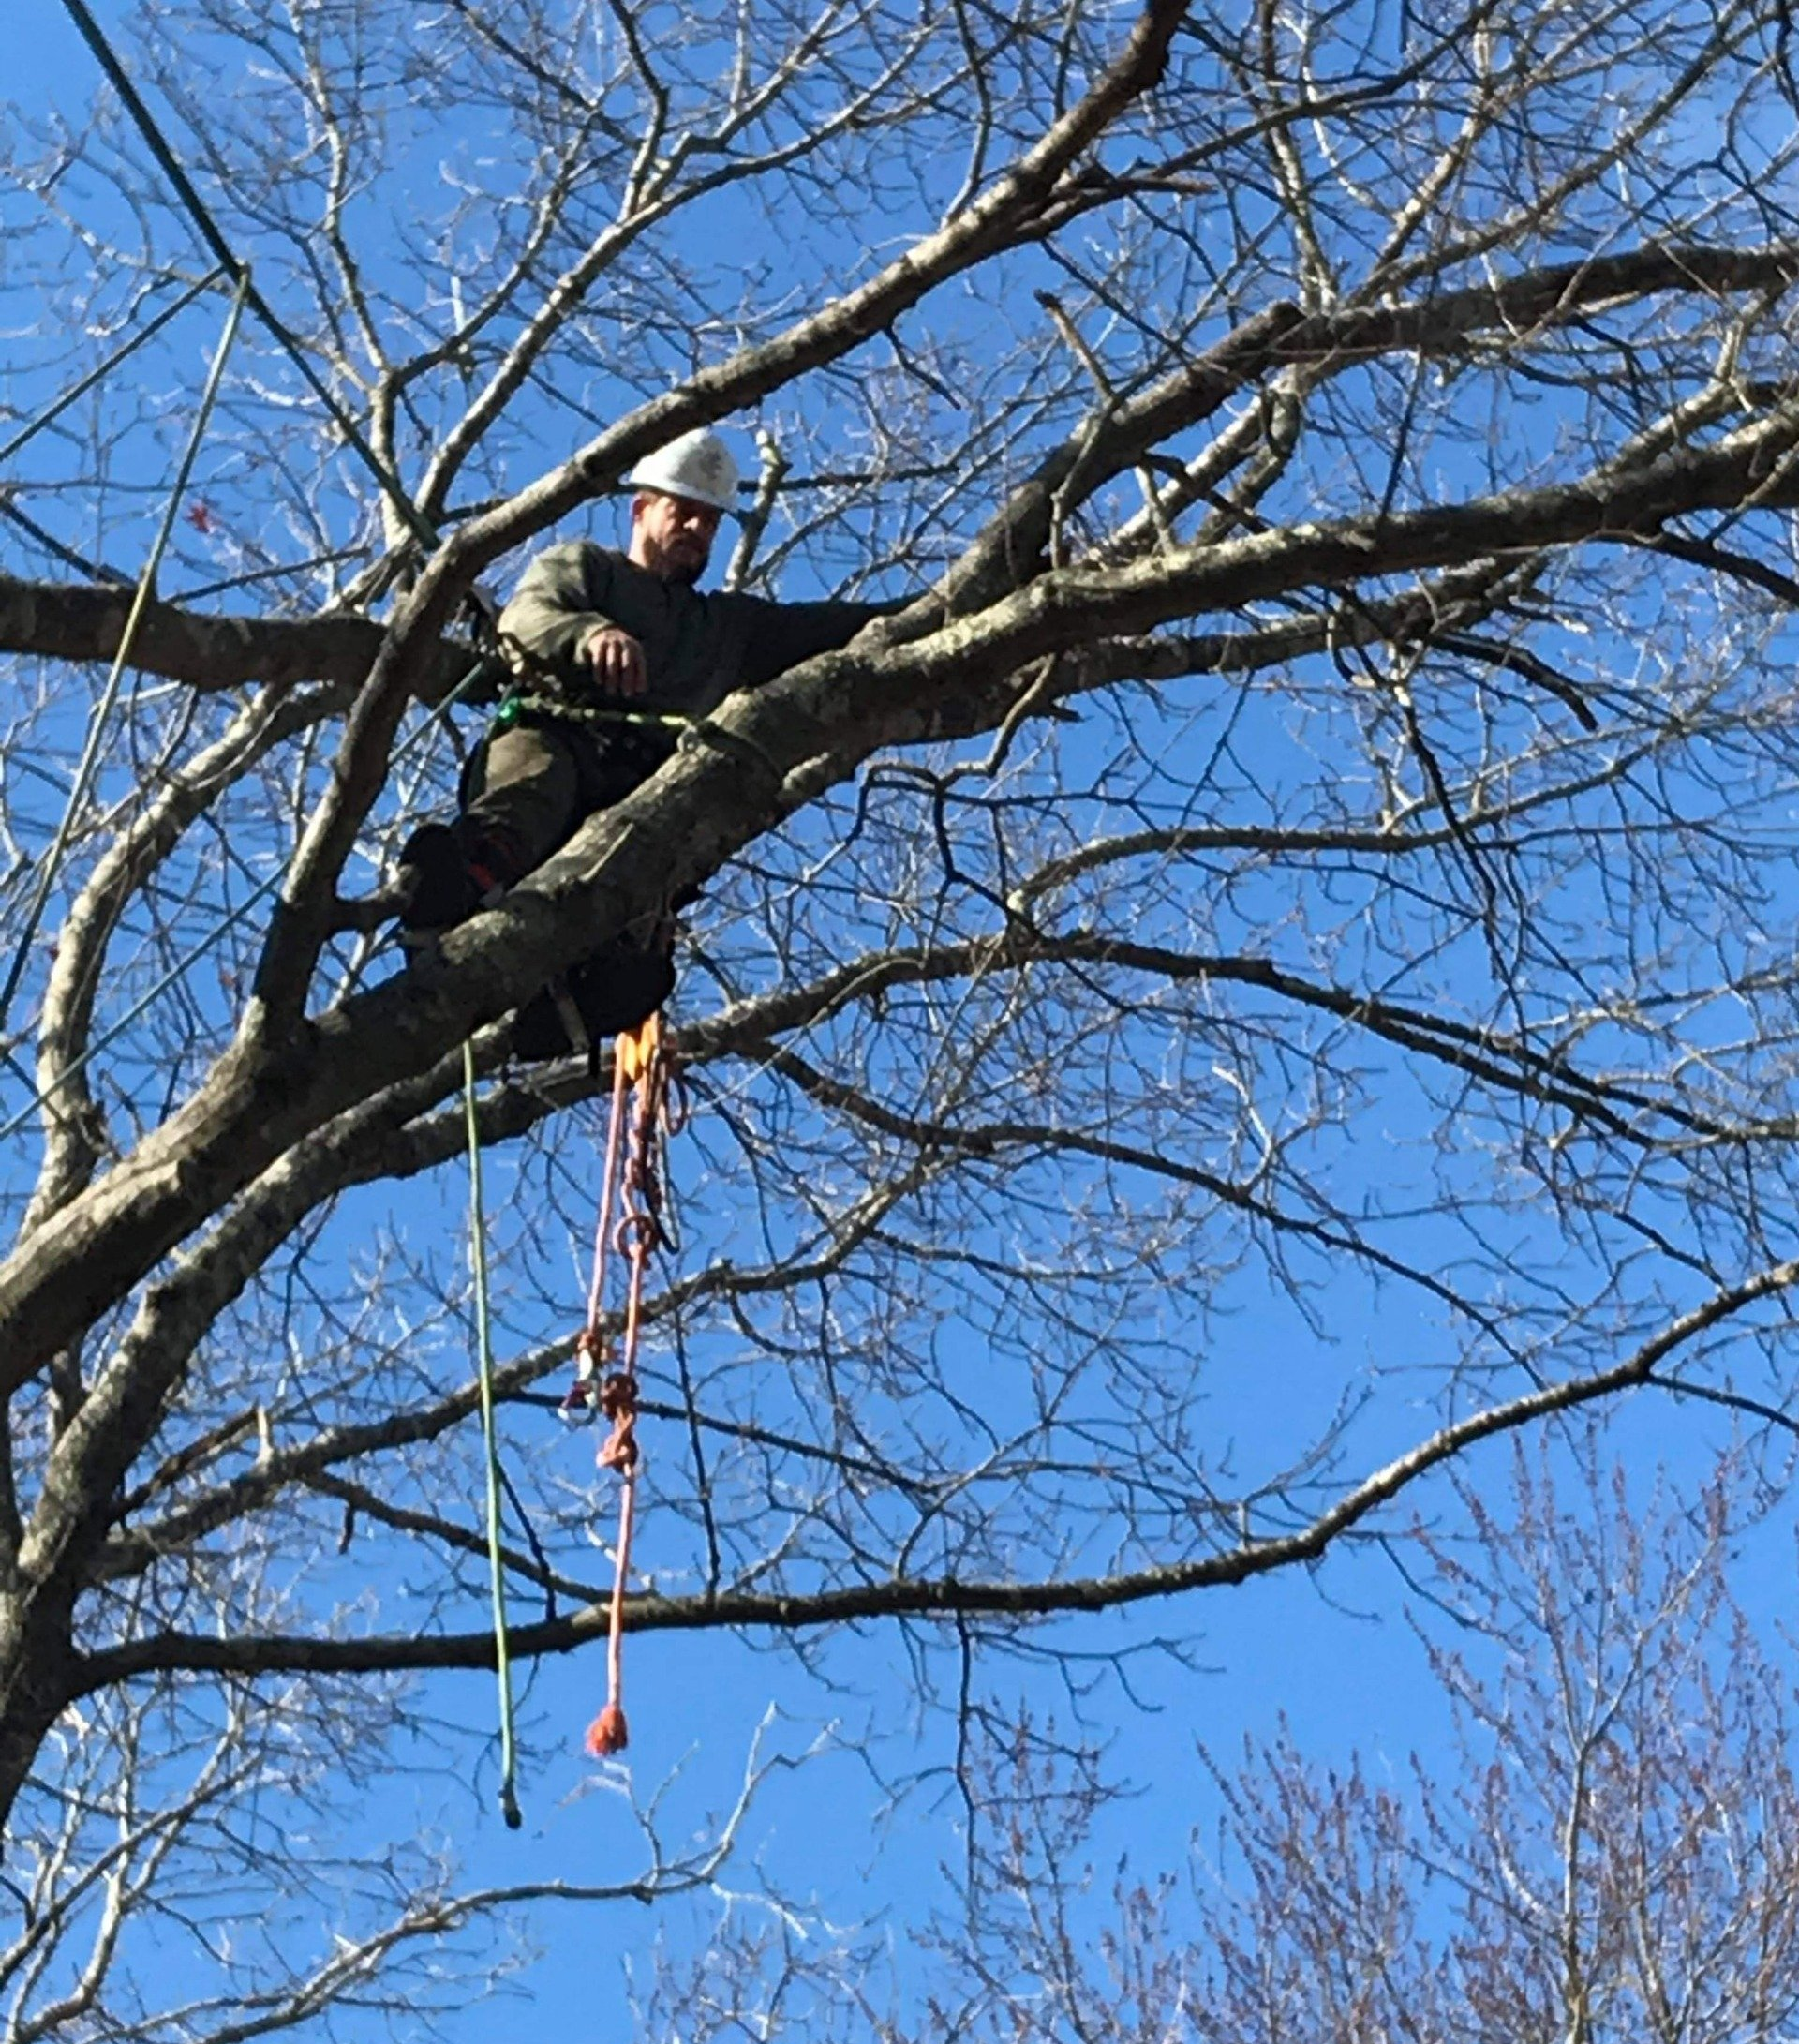 A groundsman works on breaking down some of the logs that one of our climbers felled while doing a tree removal job in Taunton MA